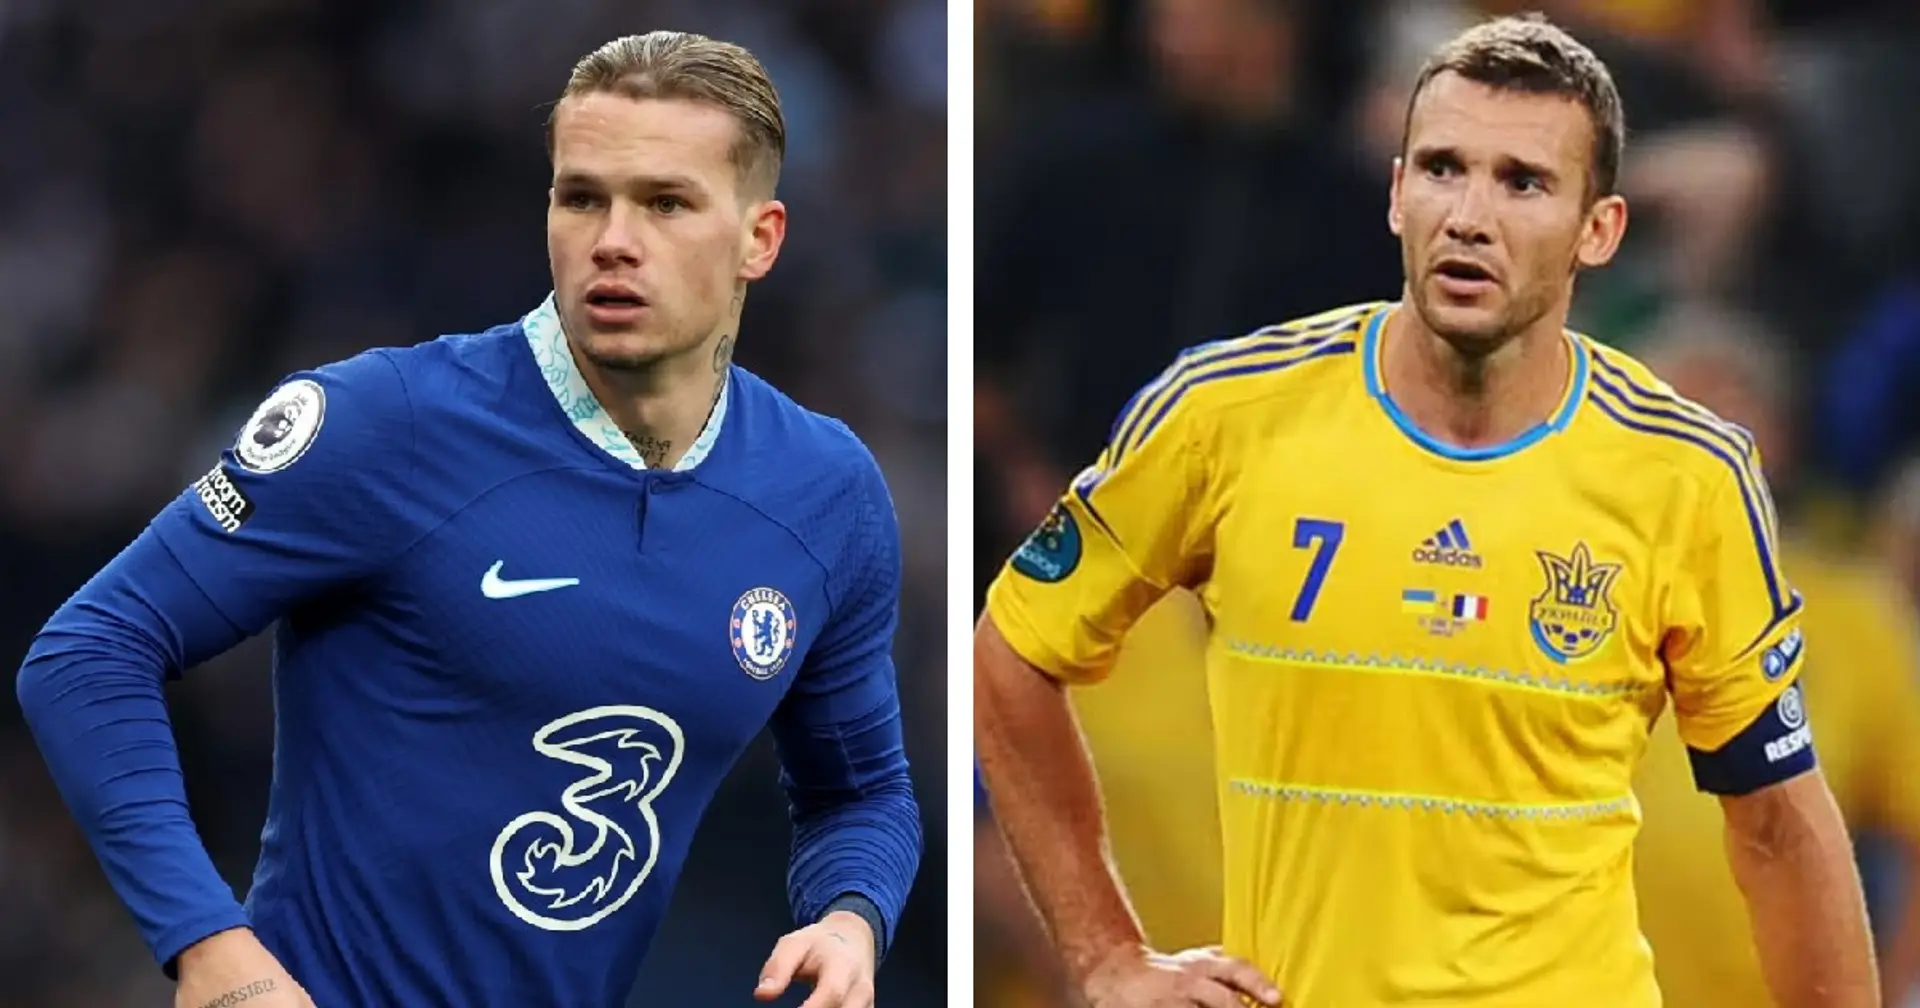 'There's a new manager now': Ukrainian legend Shevchenko backing Mudryk for success under Pochettino